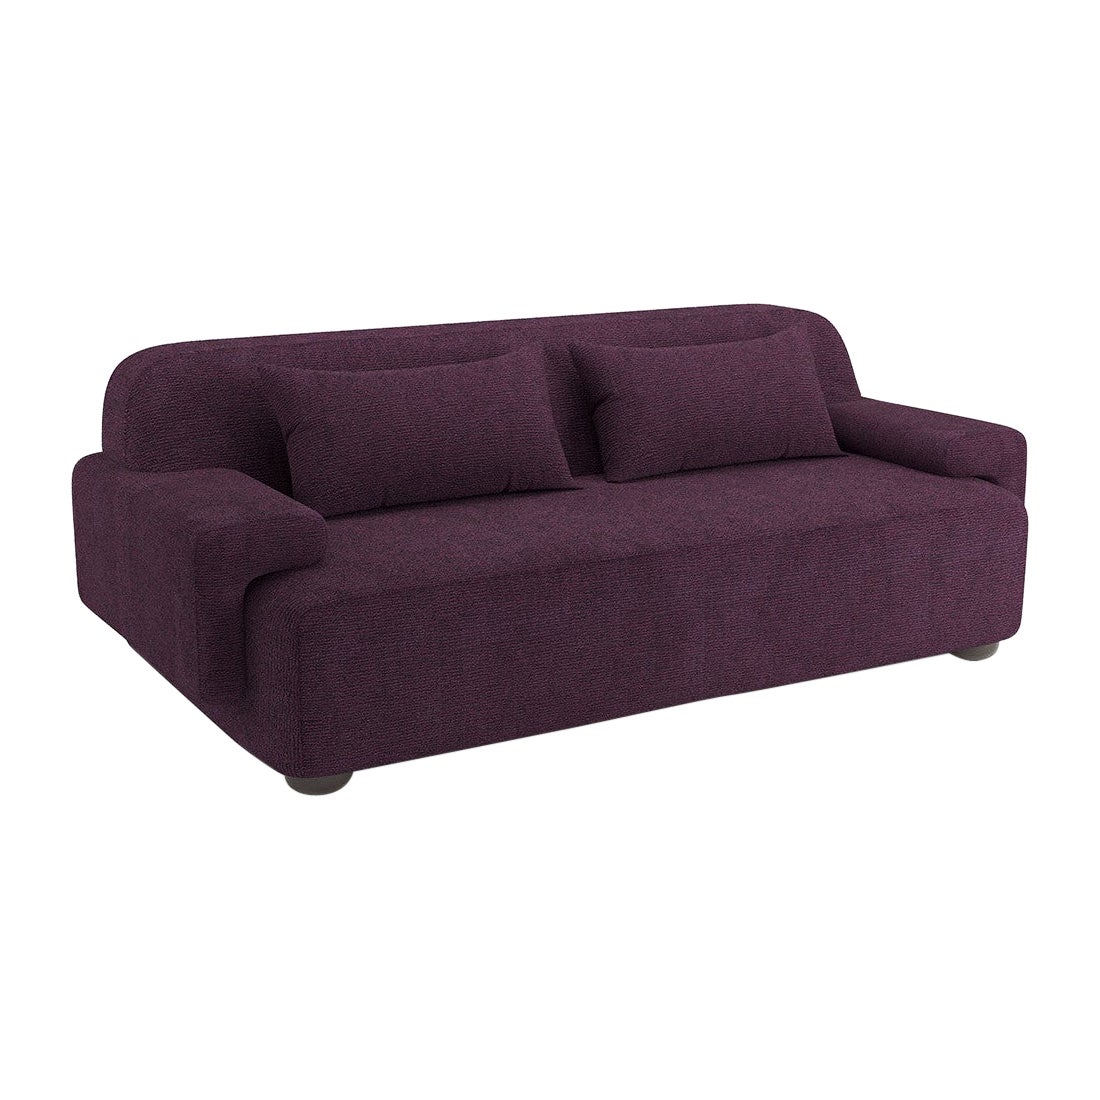 Popus Editions Lena 2.5 Seater Sofa in Eggplant Megeve Fabric with Knit Effect For Sale